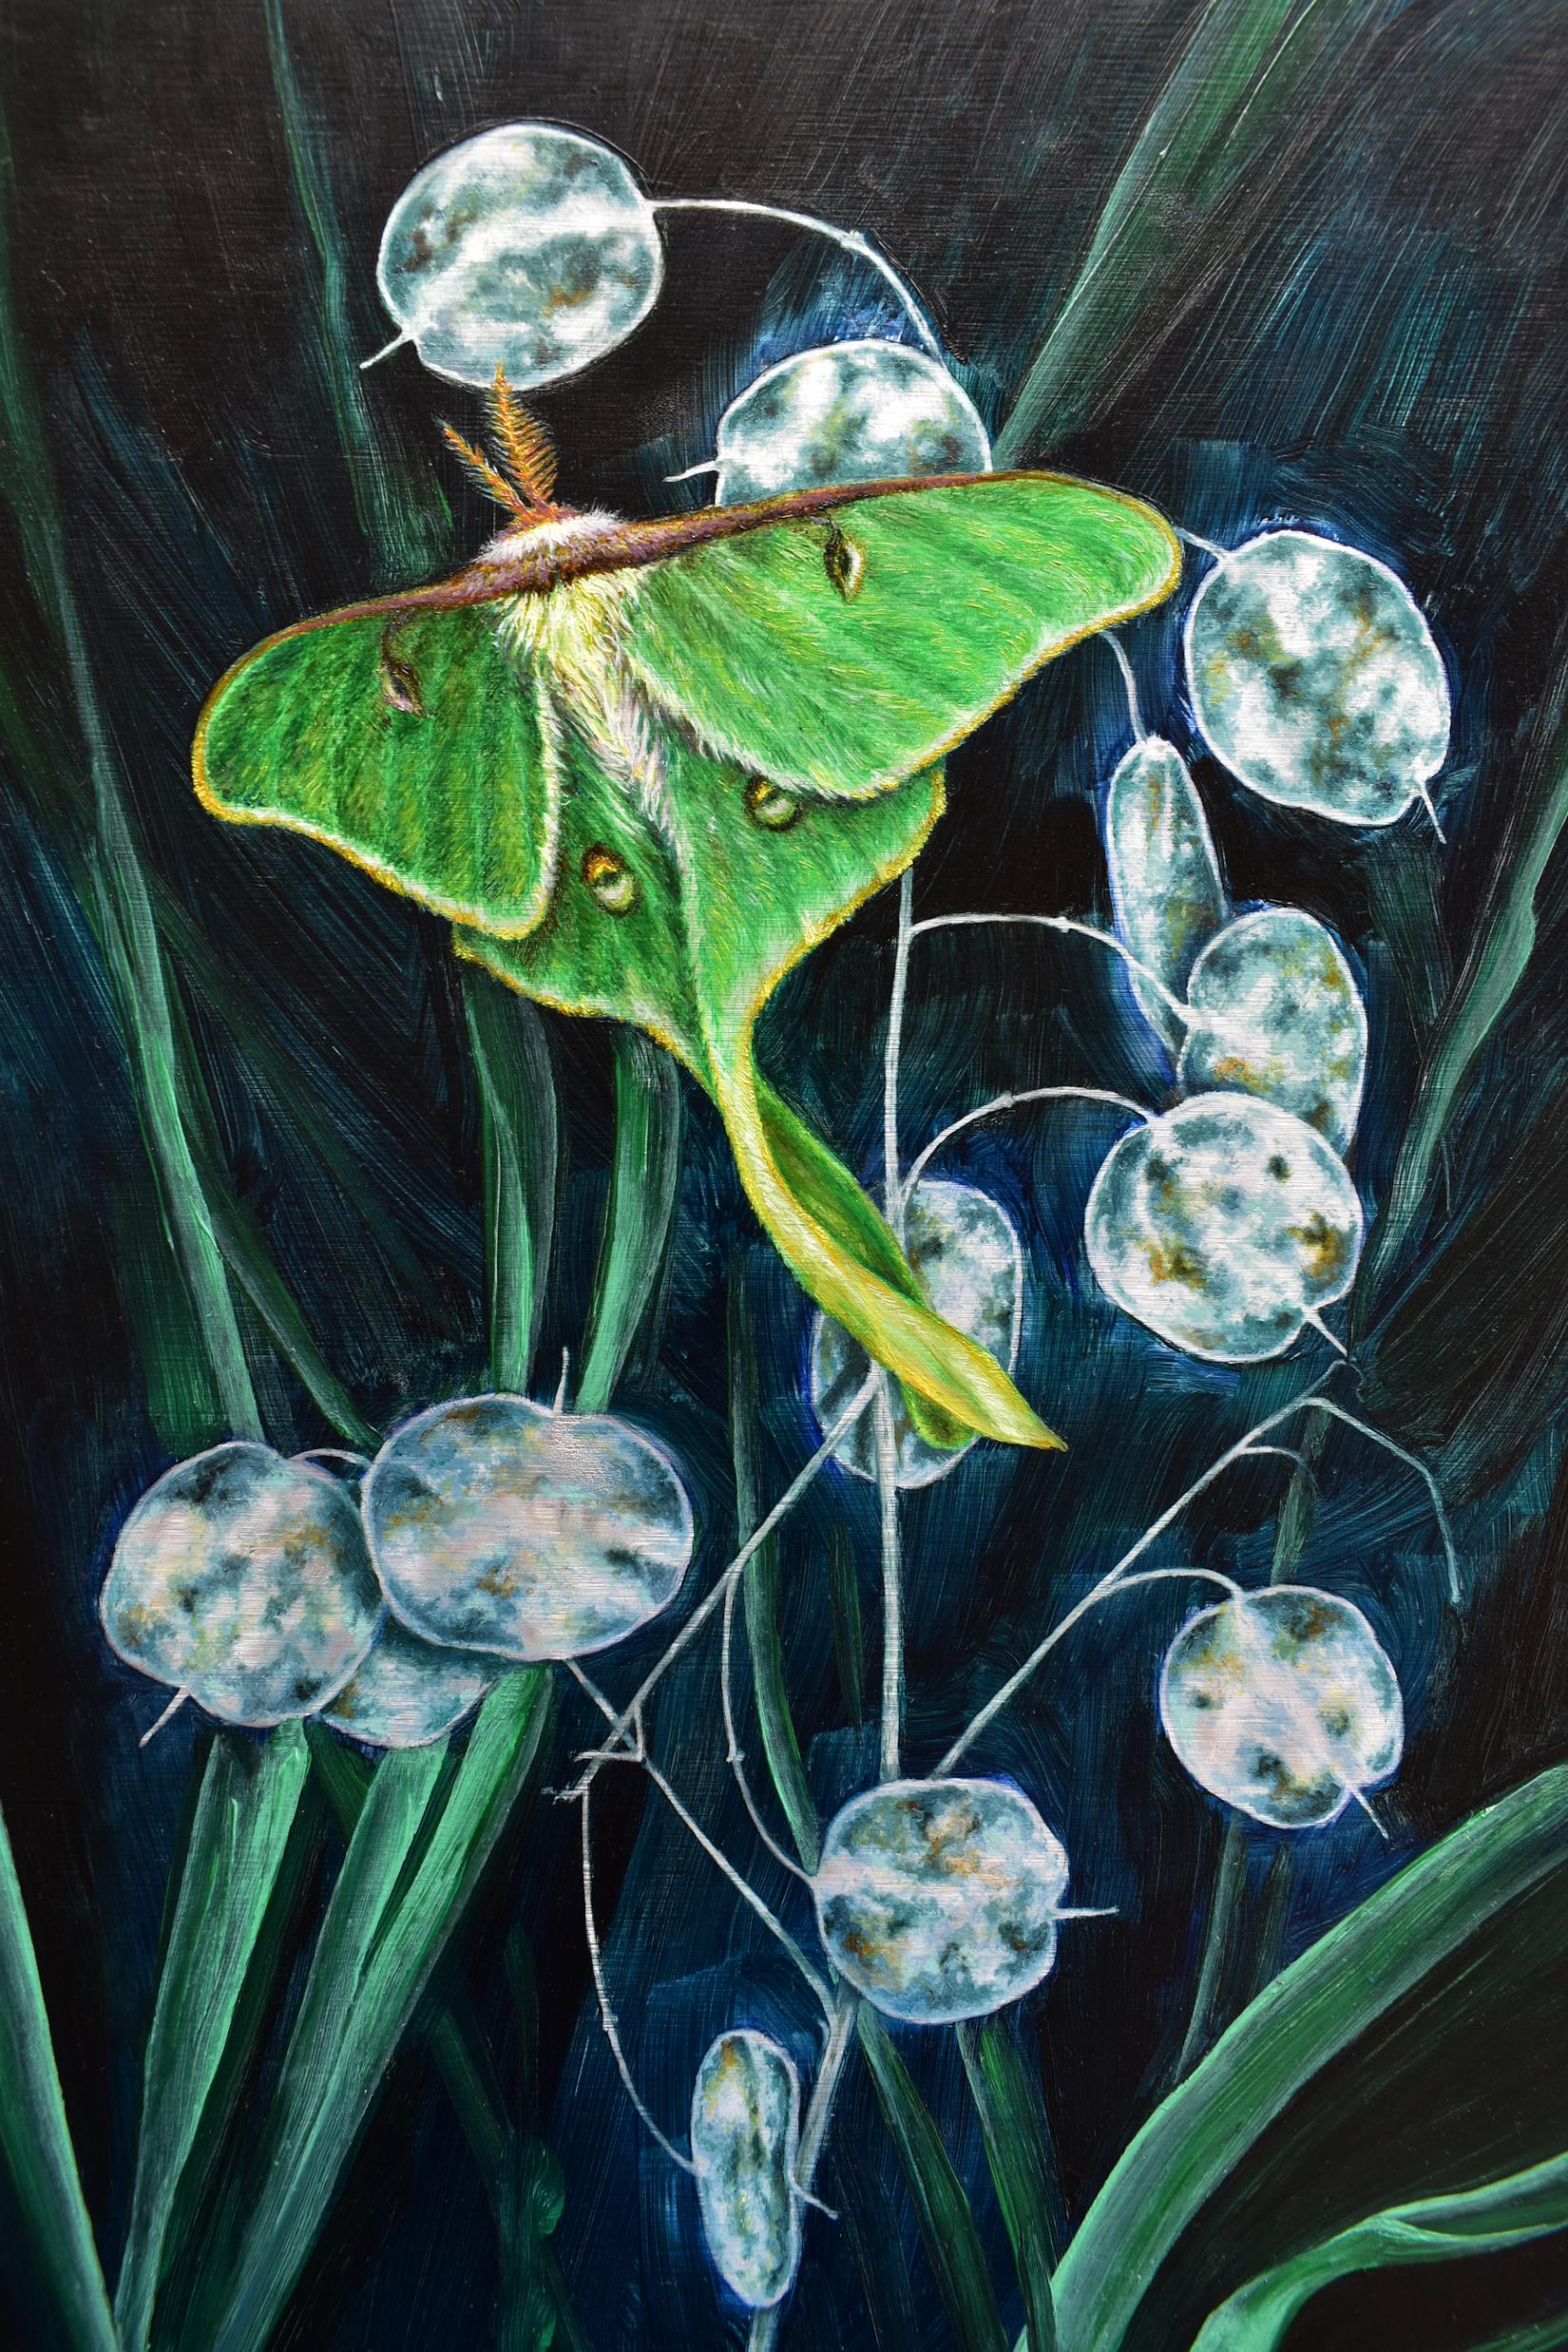 This botanical, insect painting in oil on aluminum depicts a bright green luna moth against a dark background with layered plants, stems and leaves. Fox's excellent use of material allow her to blend multiple images together, creating a seamless